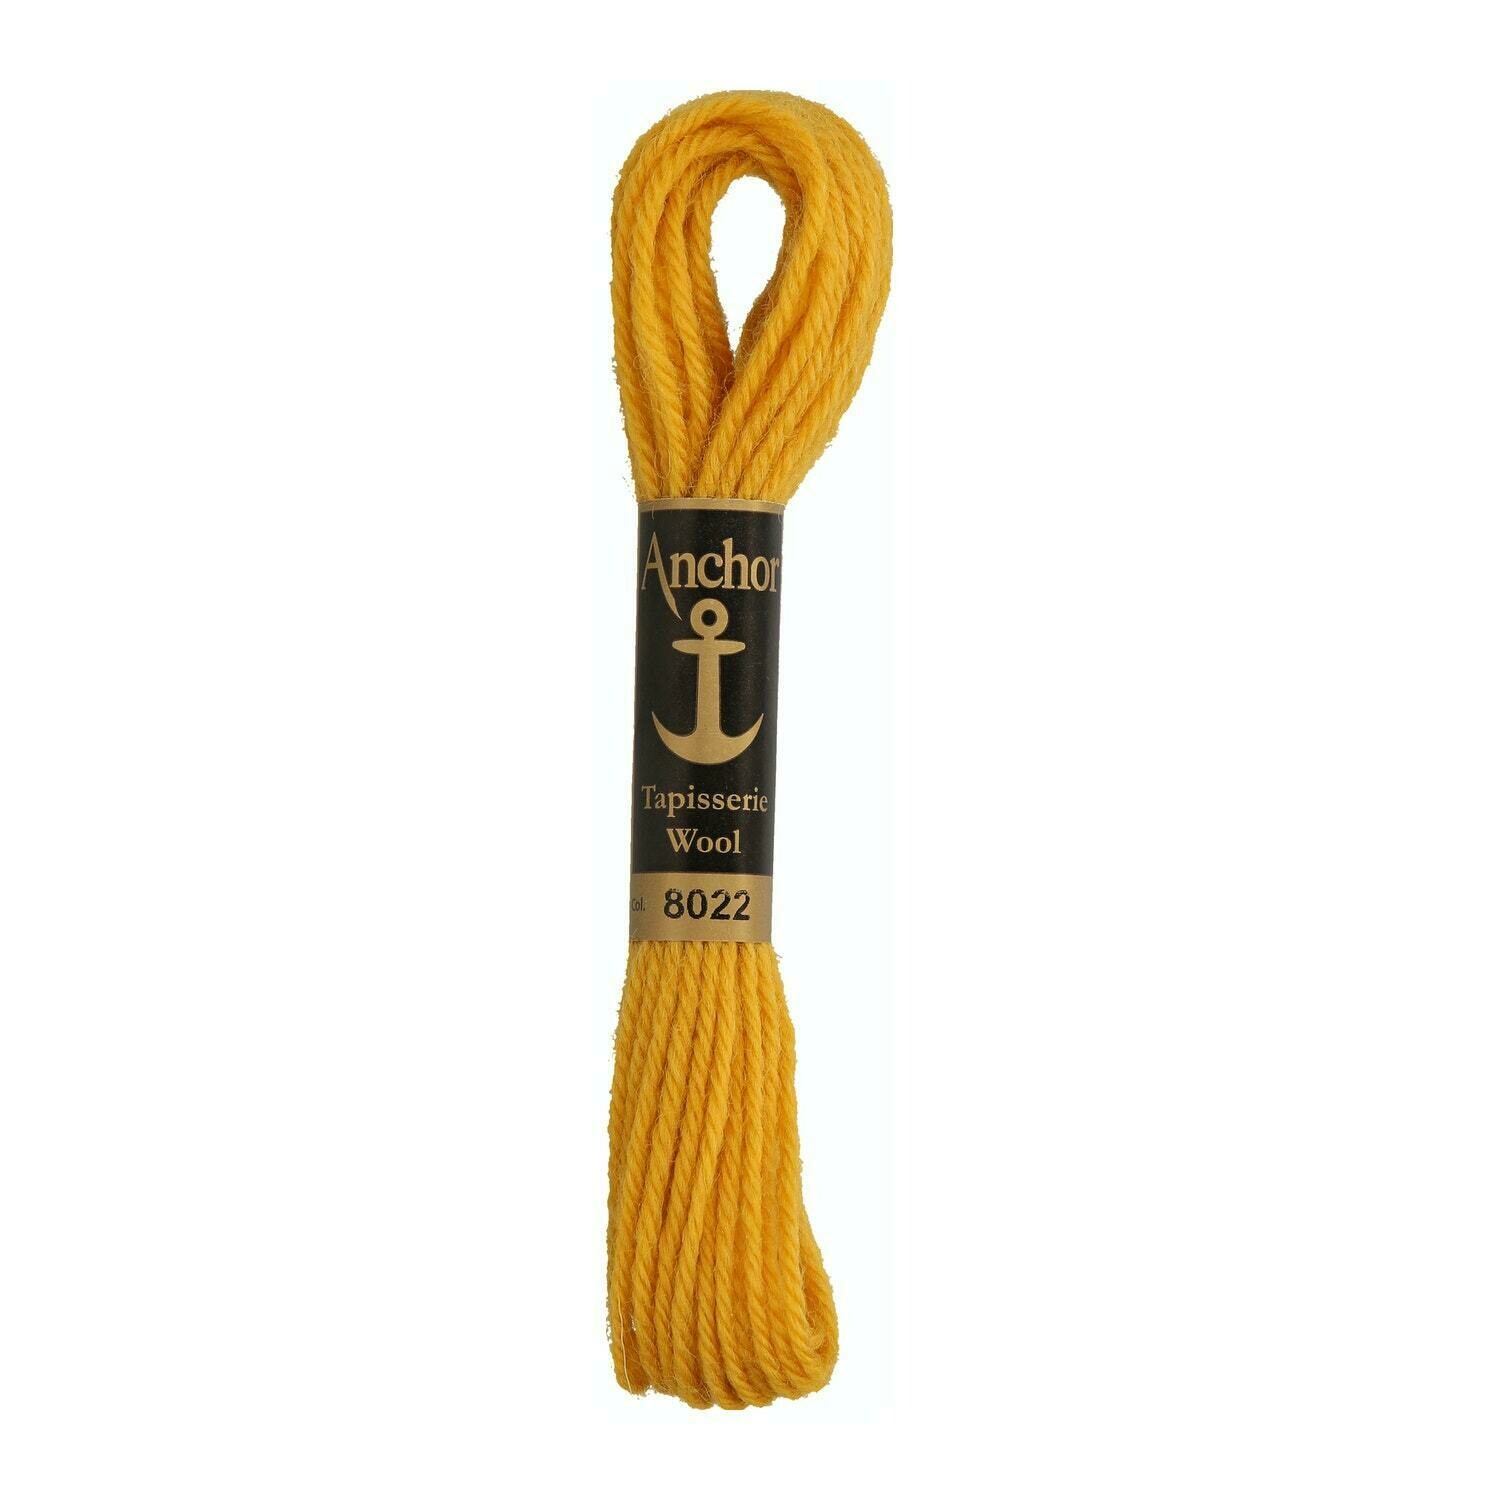 Anchor Tapisserie Wool #08022